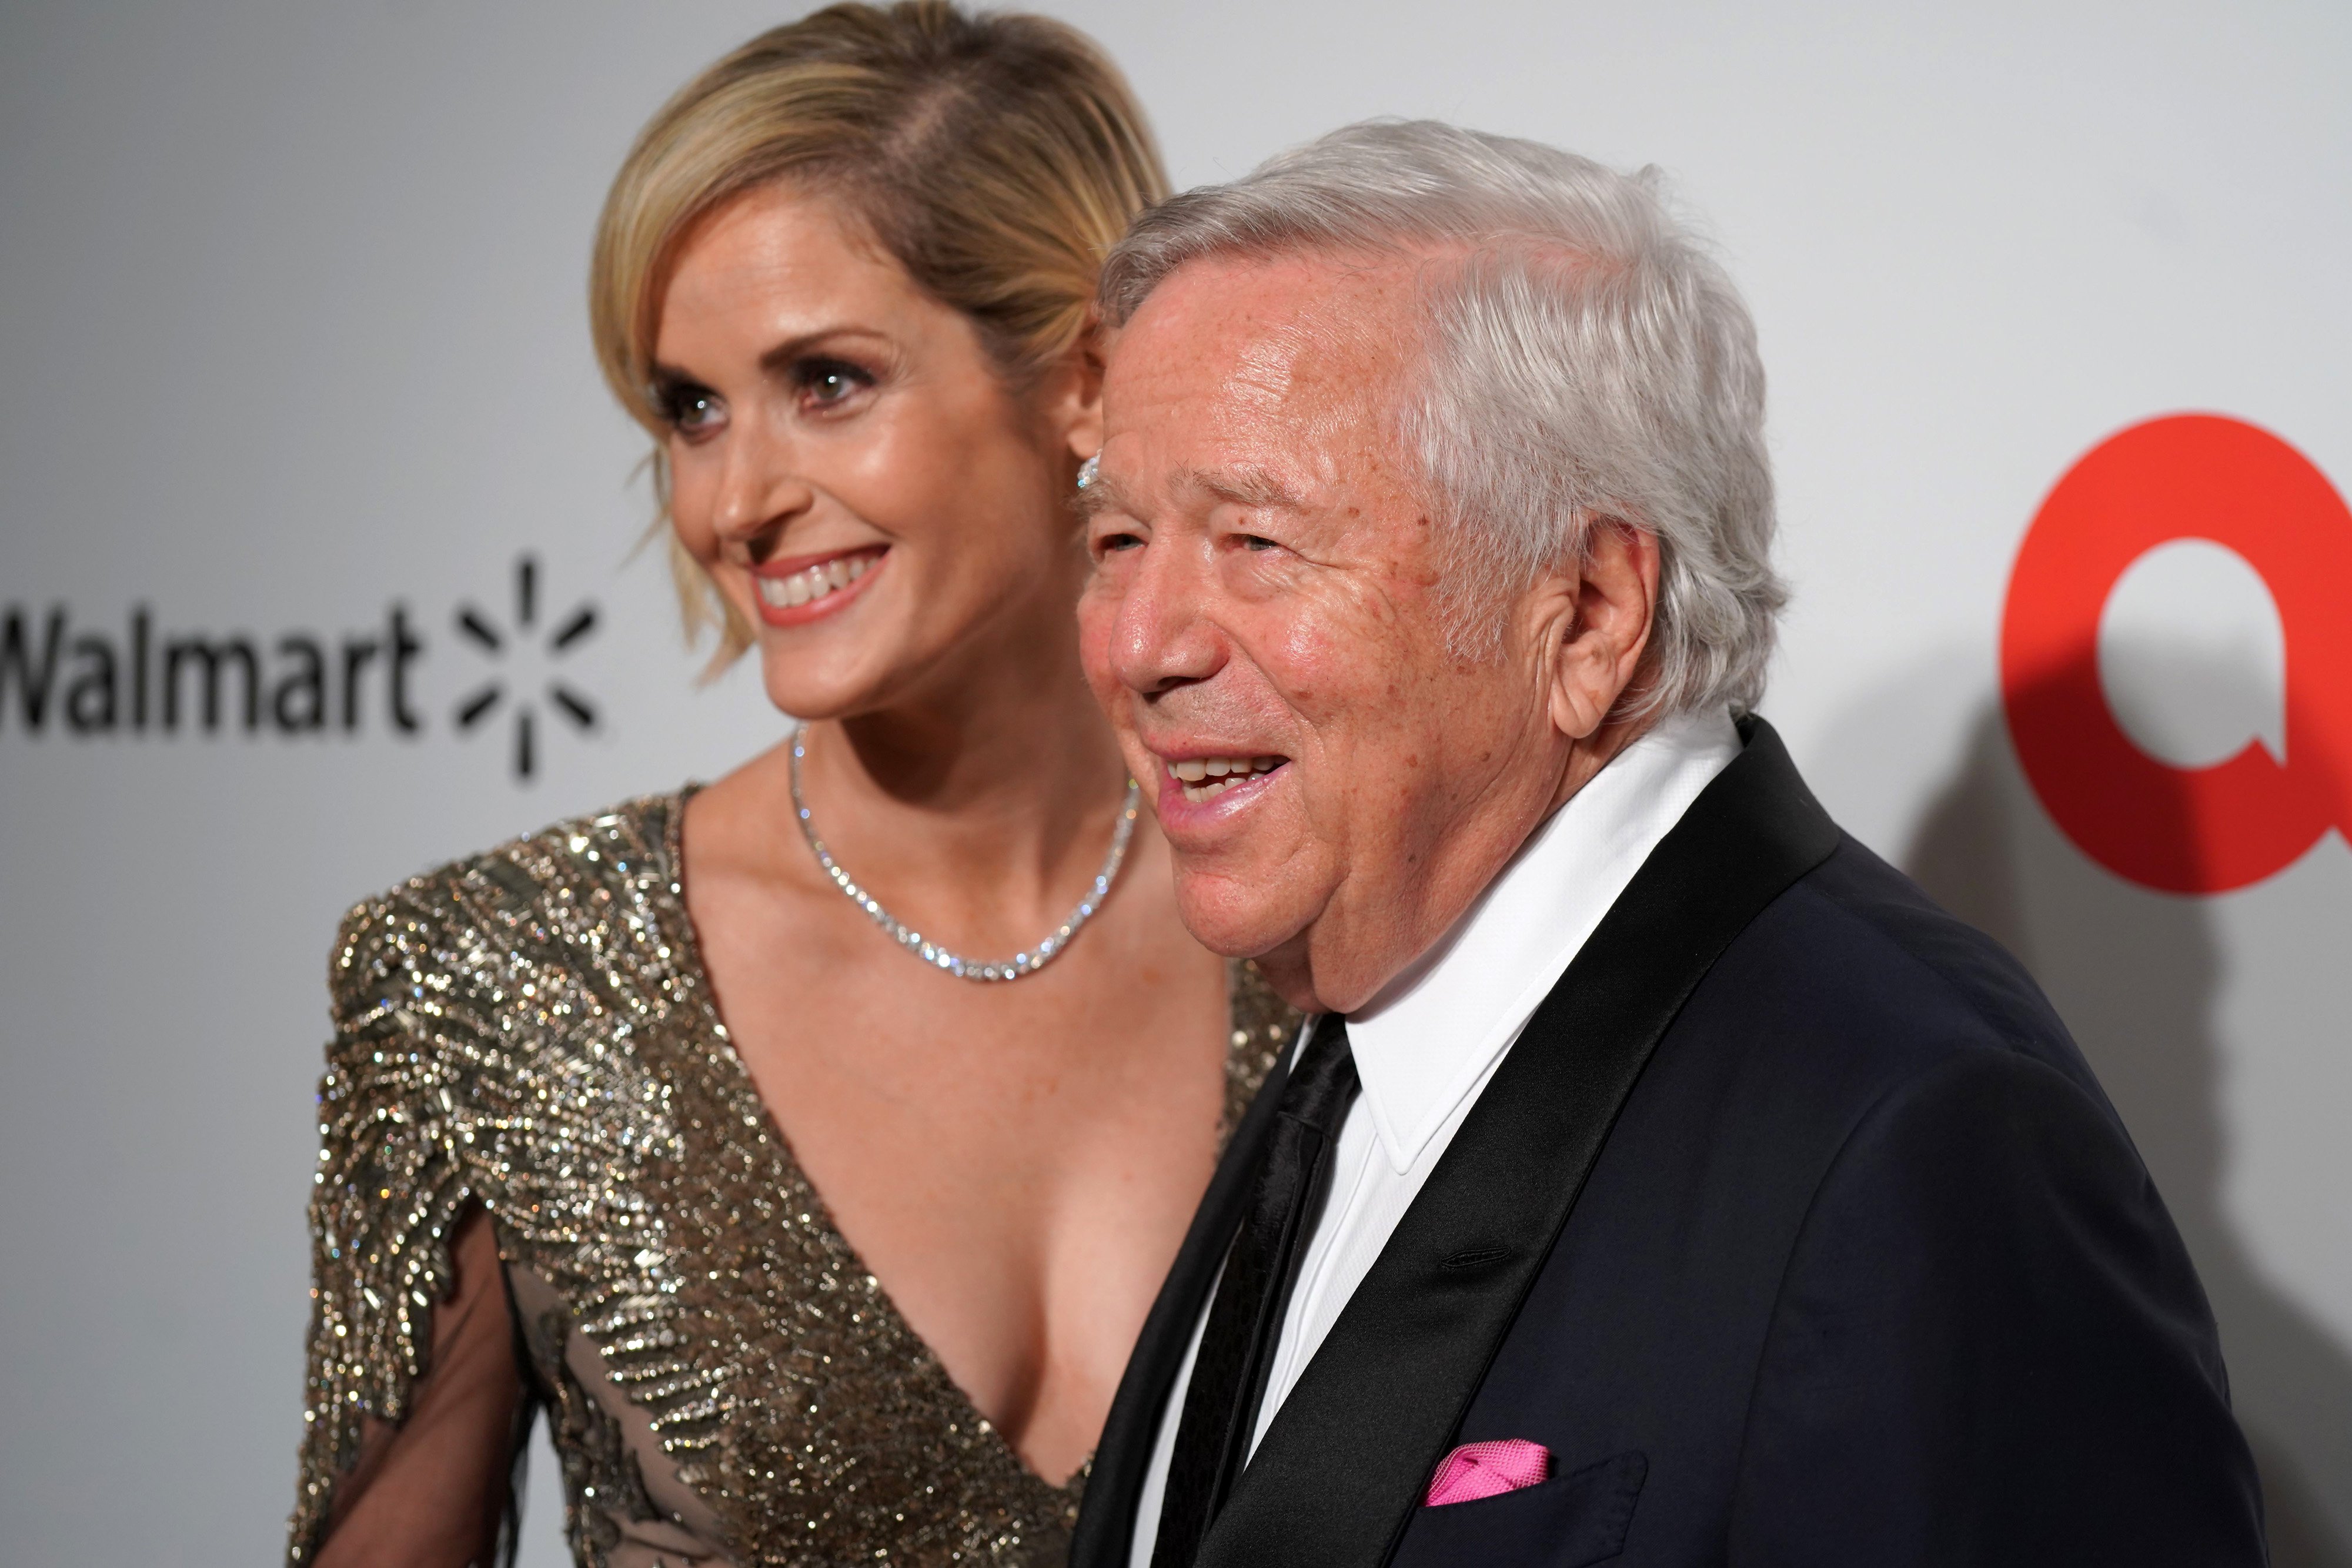 Dana Blumberg and Robert Kraft attend the 28th Annual Elton John AIDS Foundation Academy Awards Viewing Party